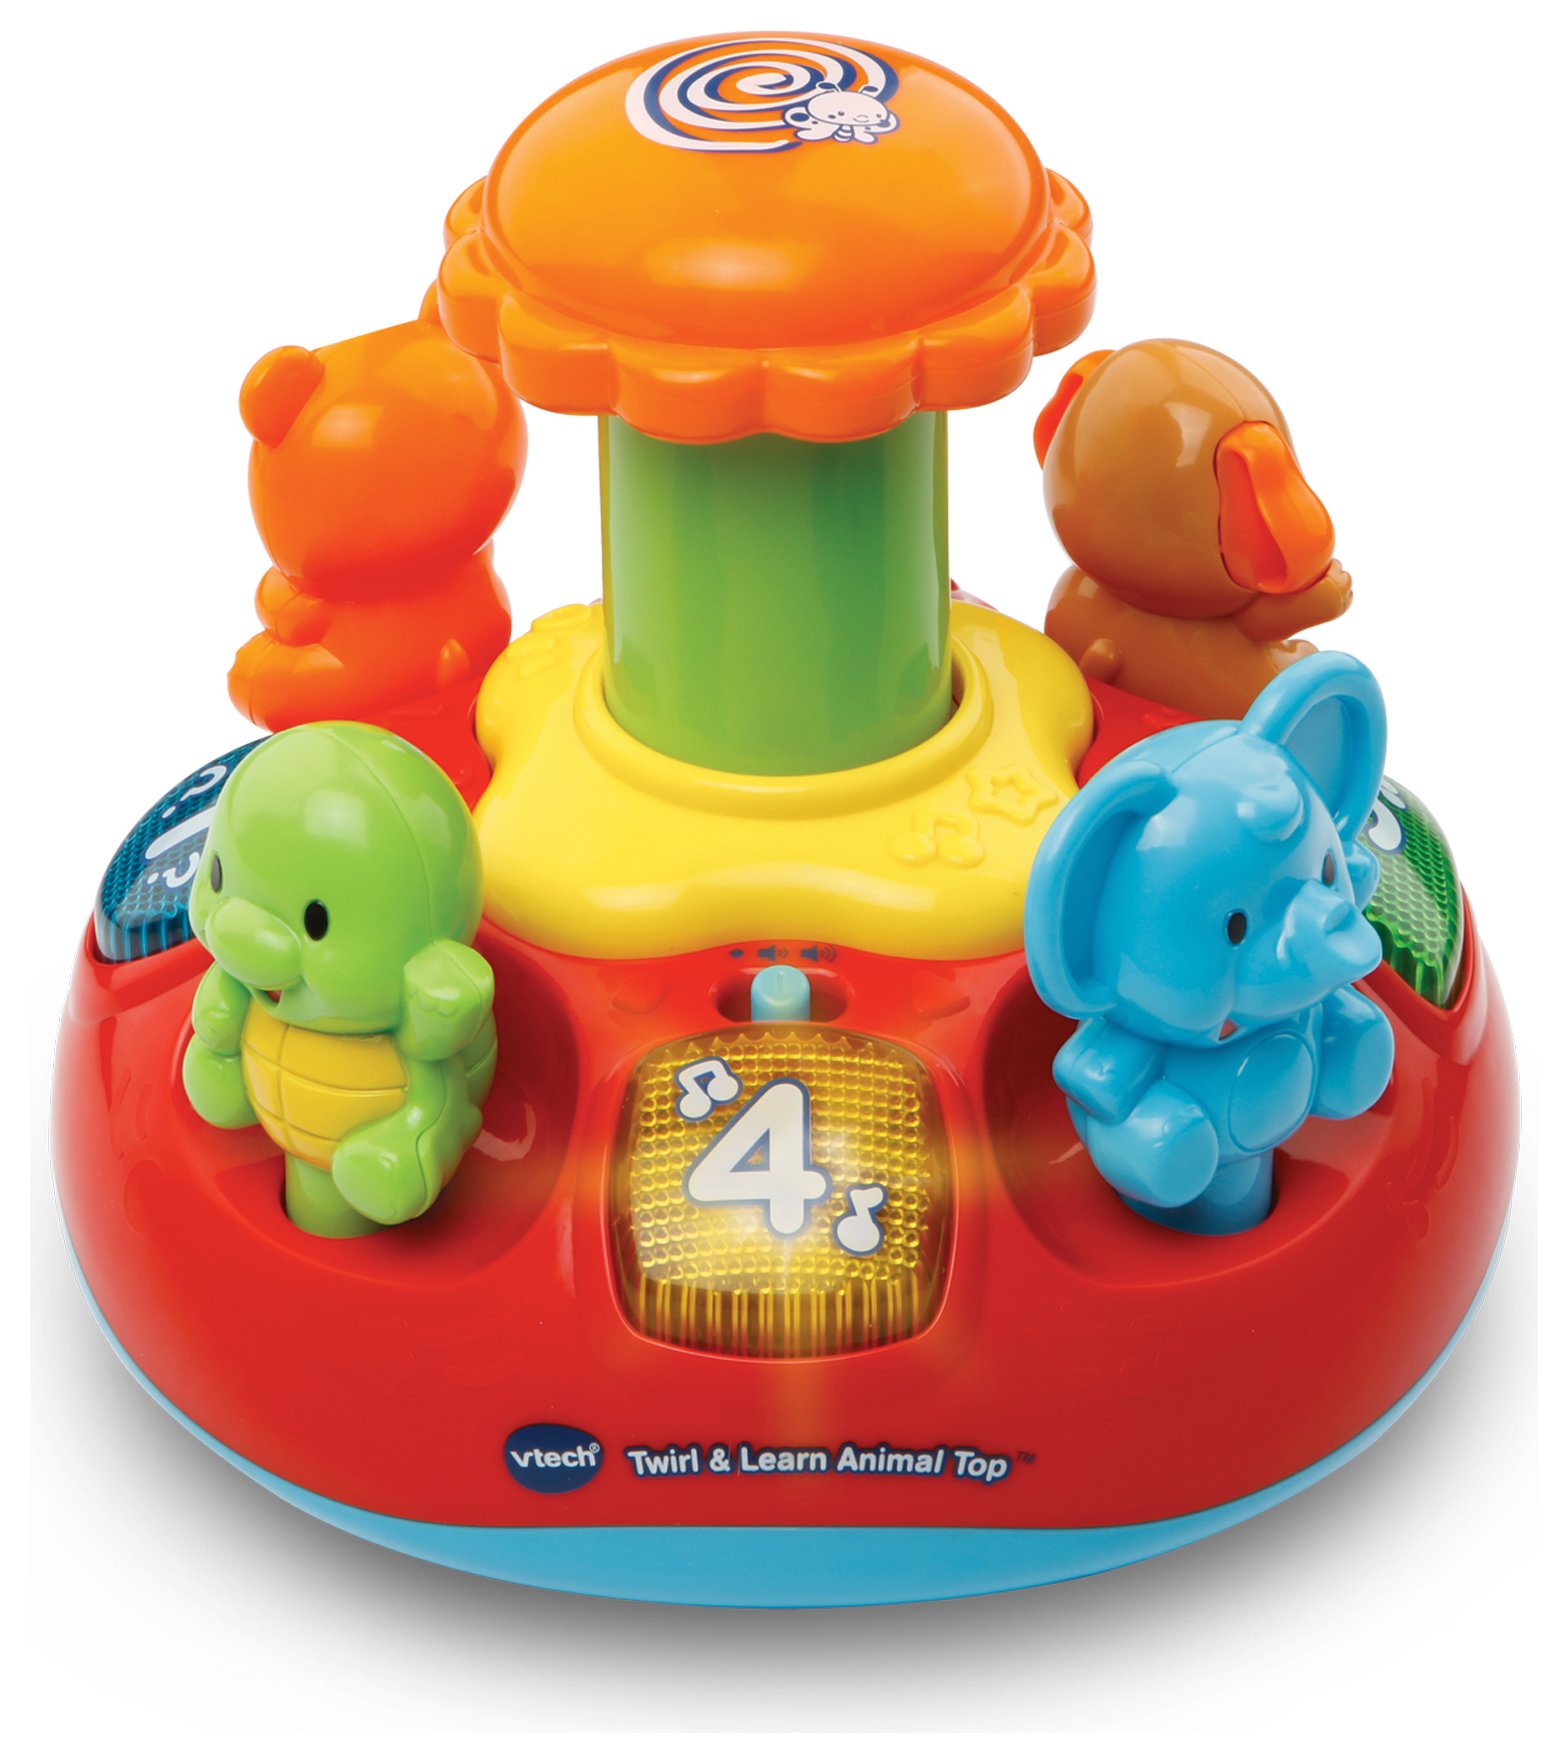 VTech Push and Play Spinning Top.